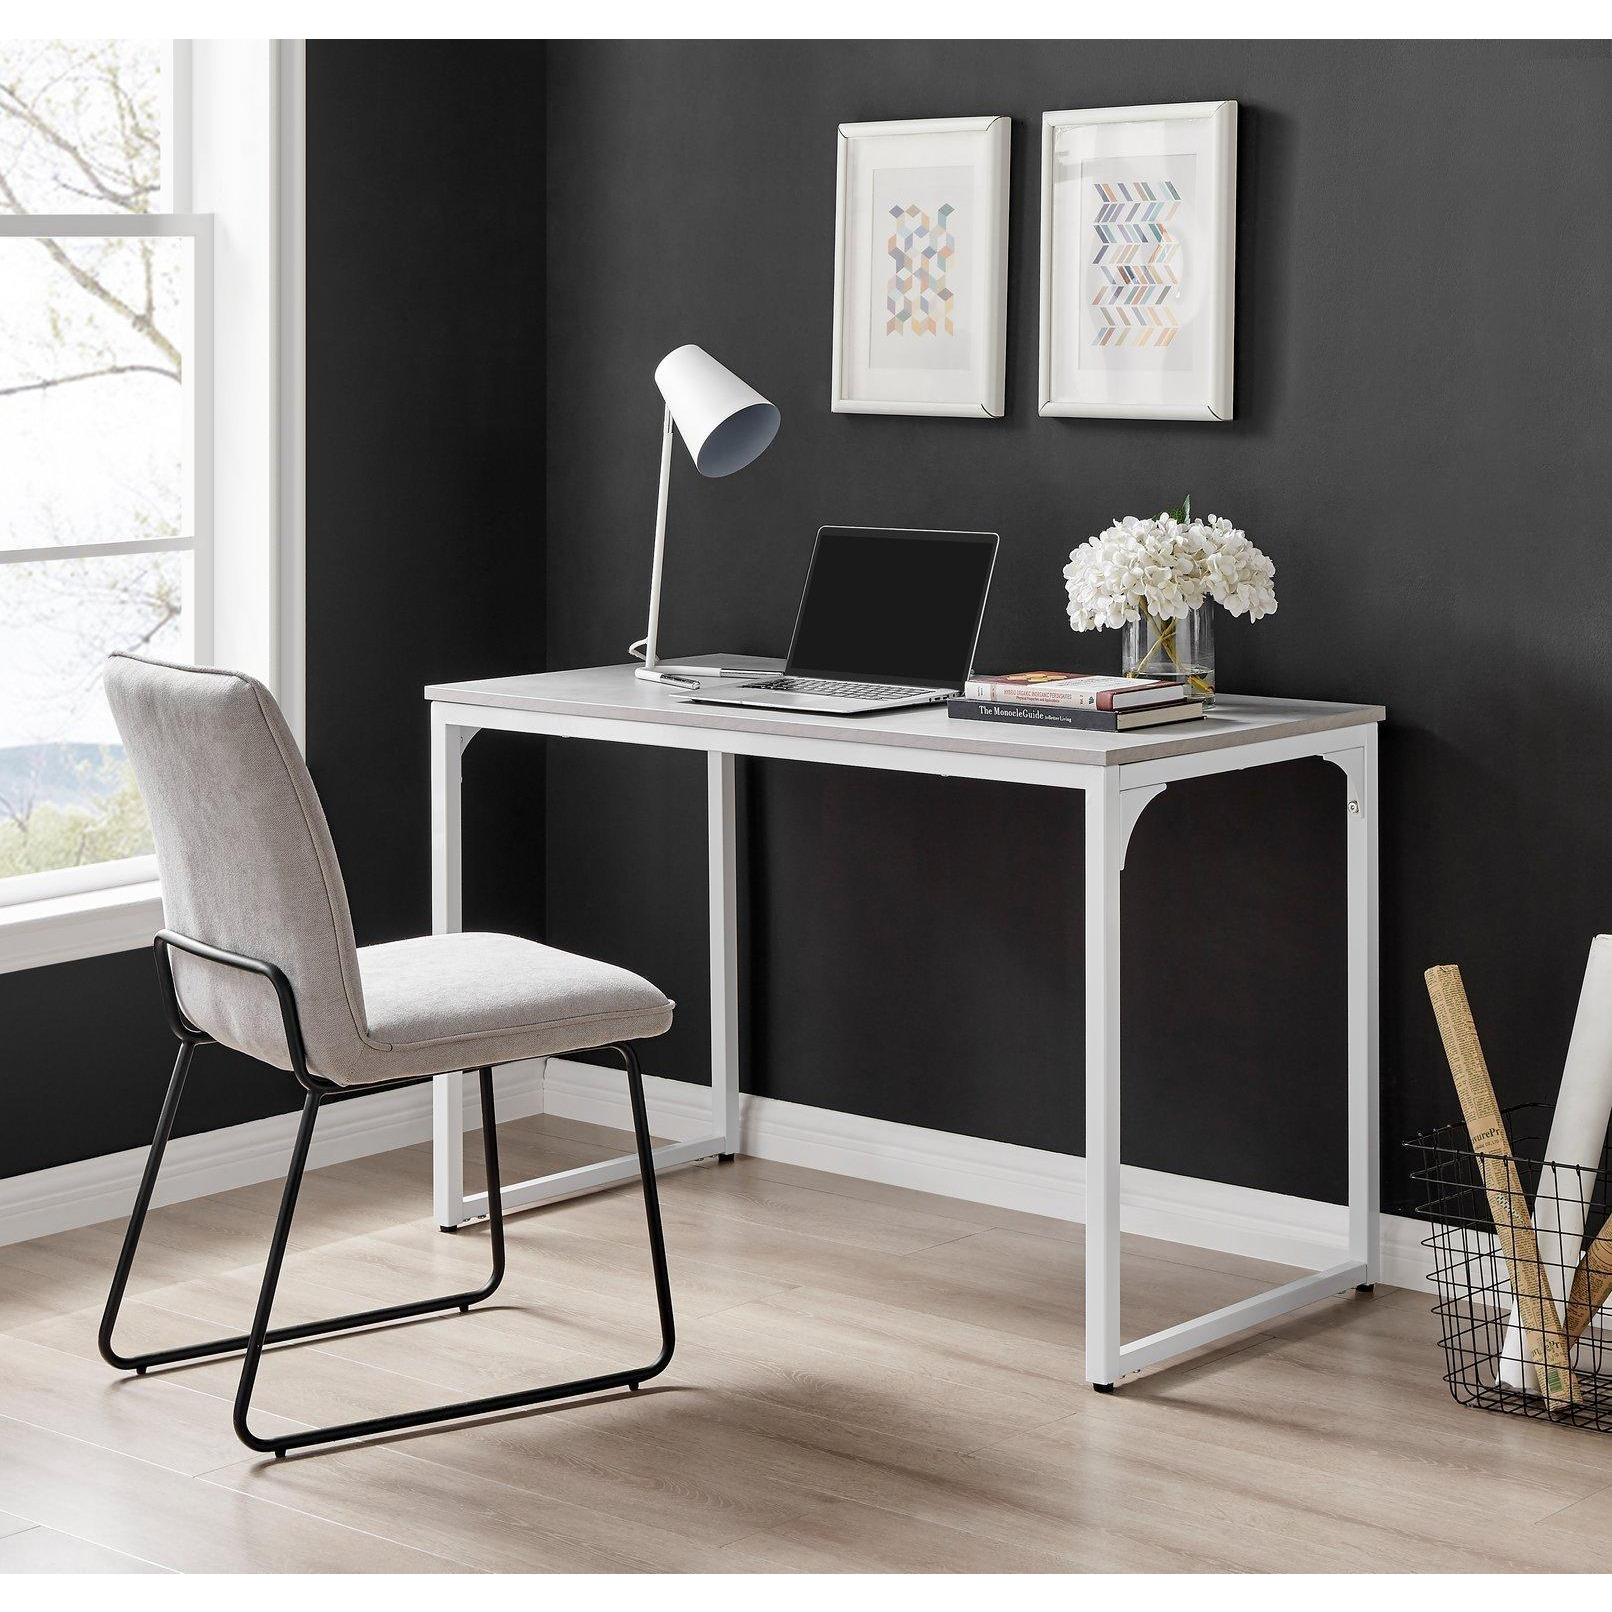 Kendrick 120cm Melamine Coated Home Office Computer Desk with White Legs - image 1